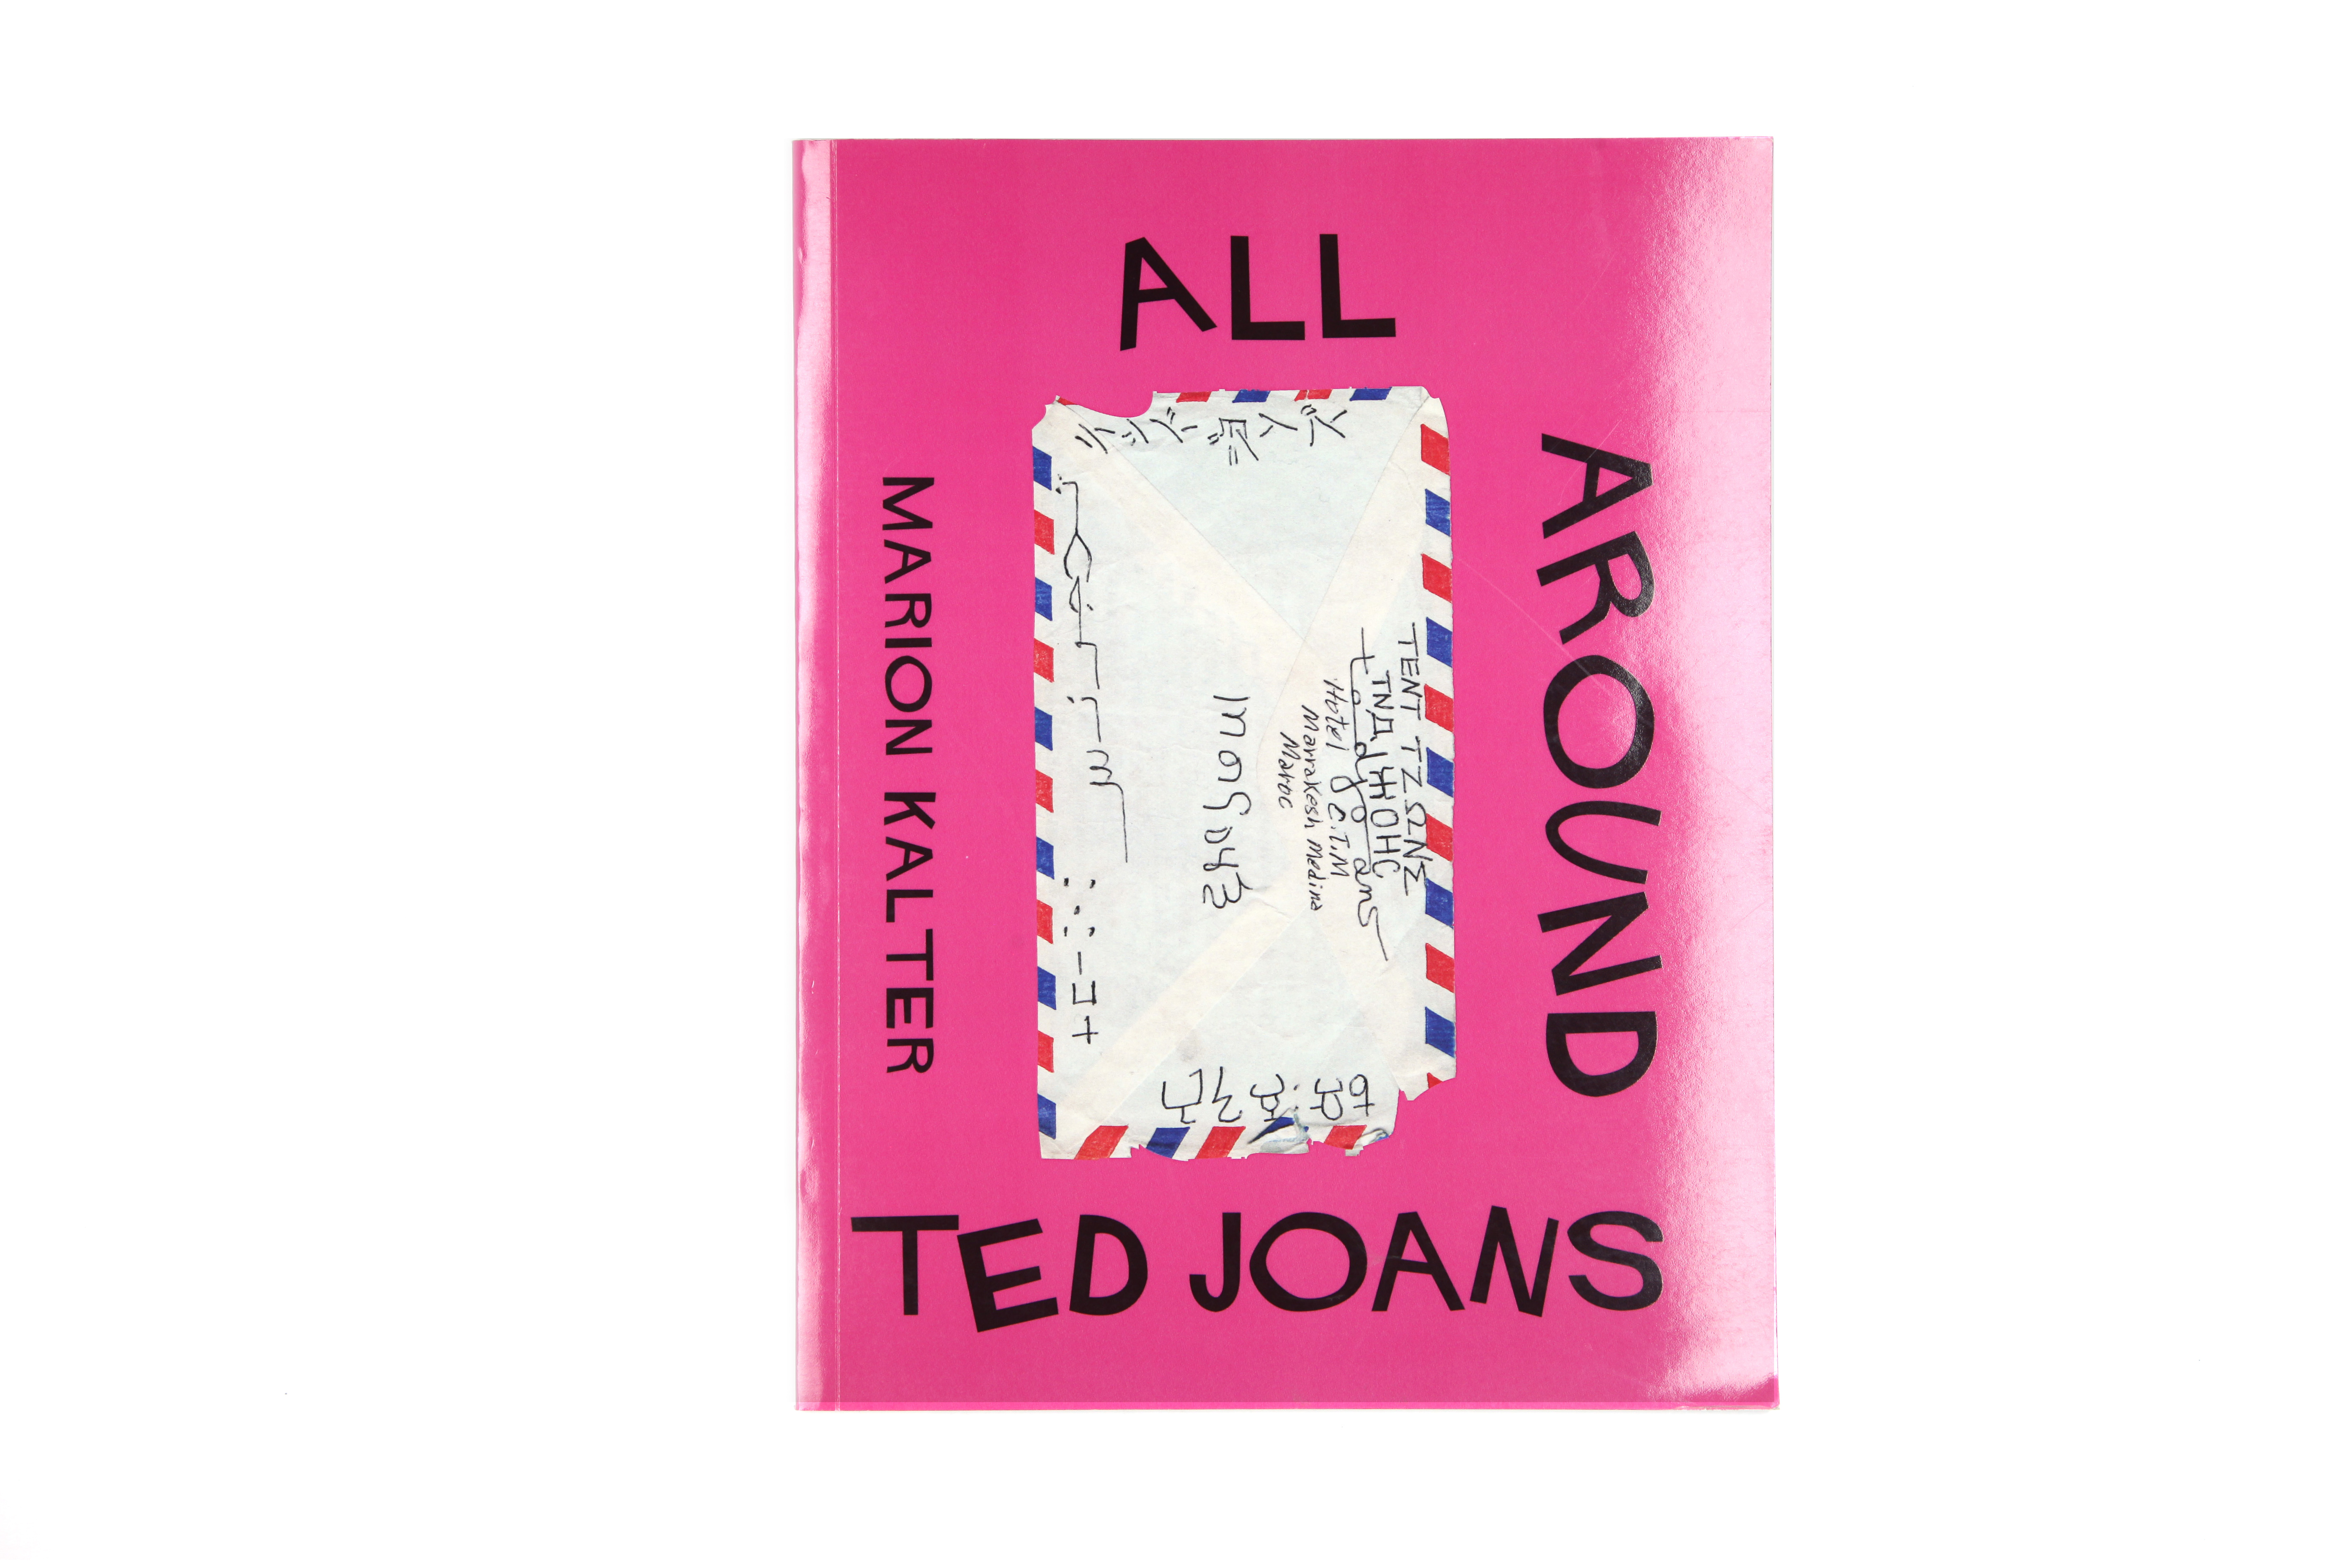 All Around Ted Joans